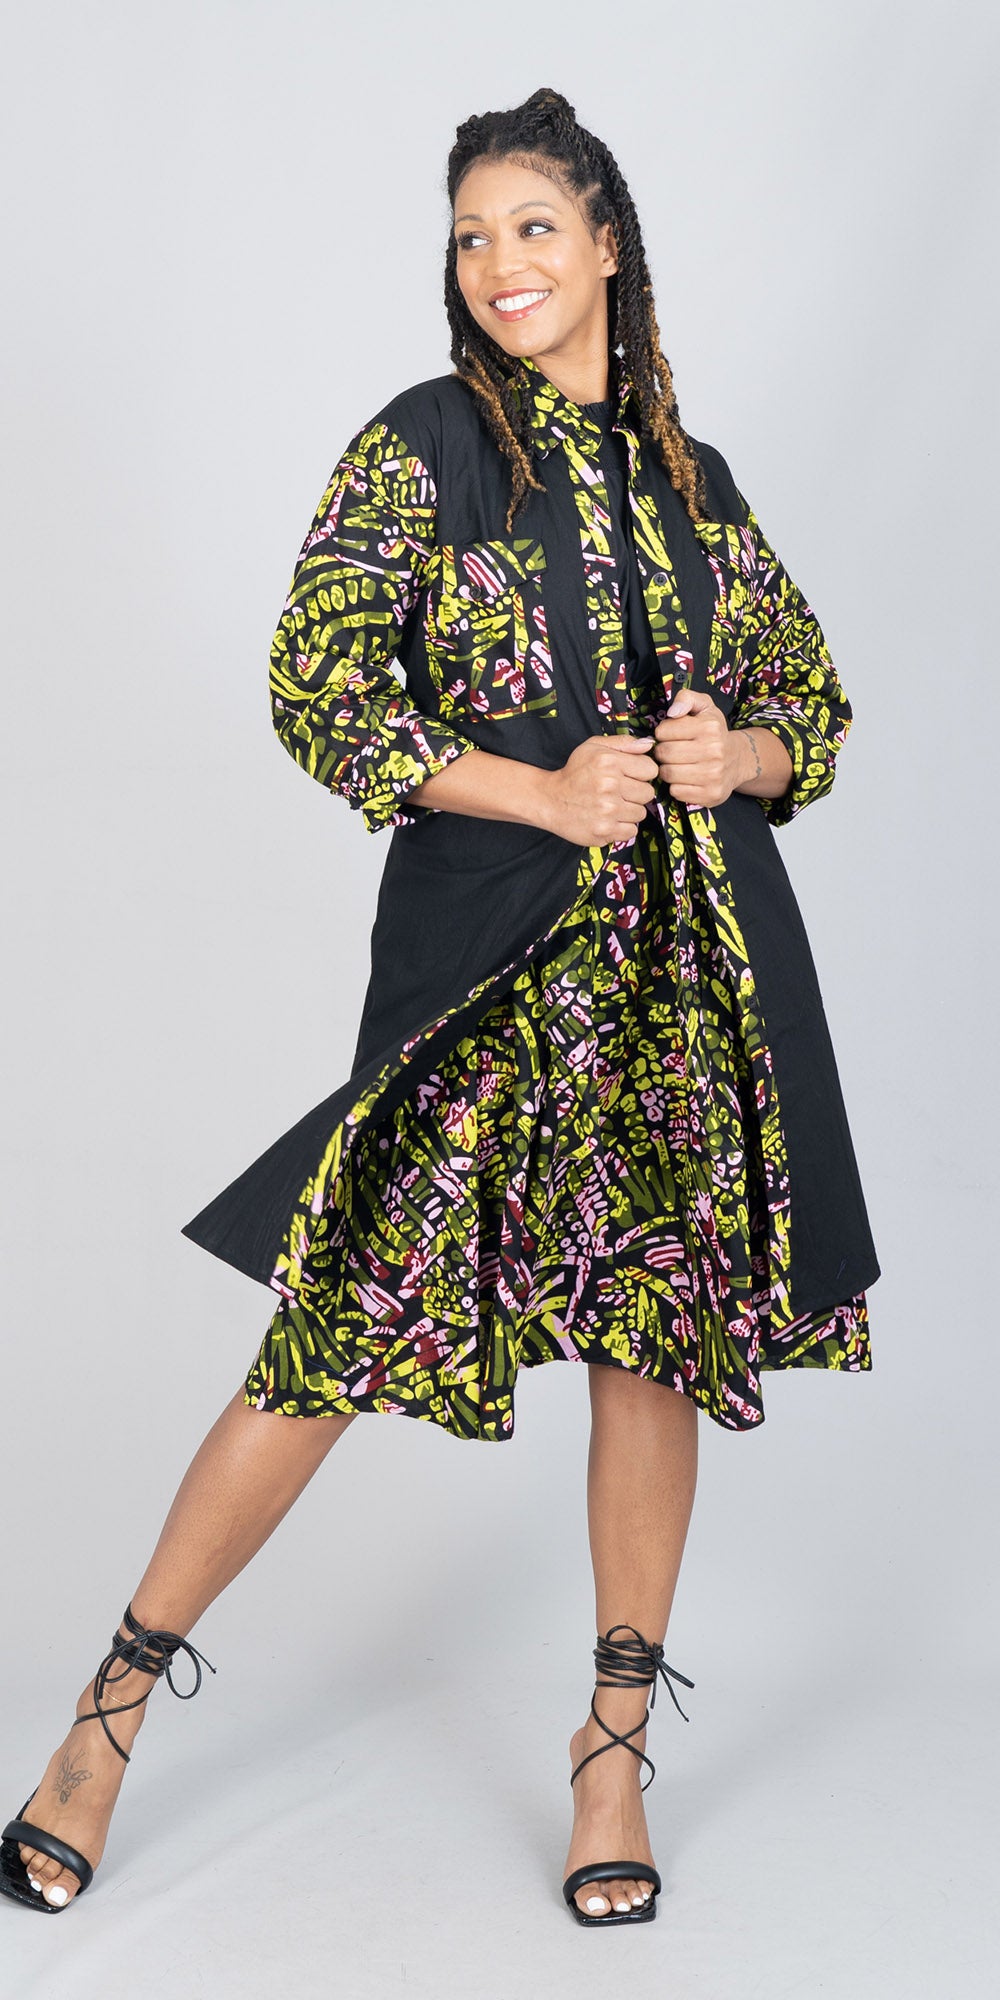 KaraChic 7755S-592 - African Print and Solid Dress